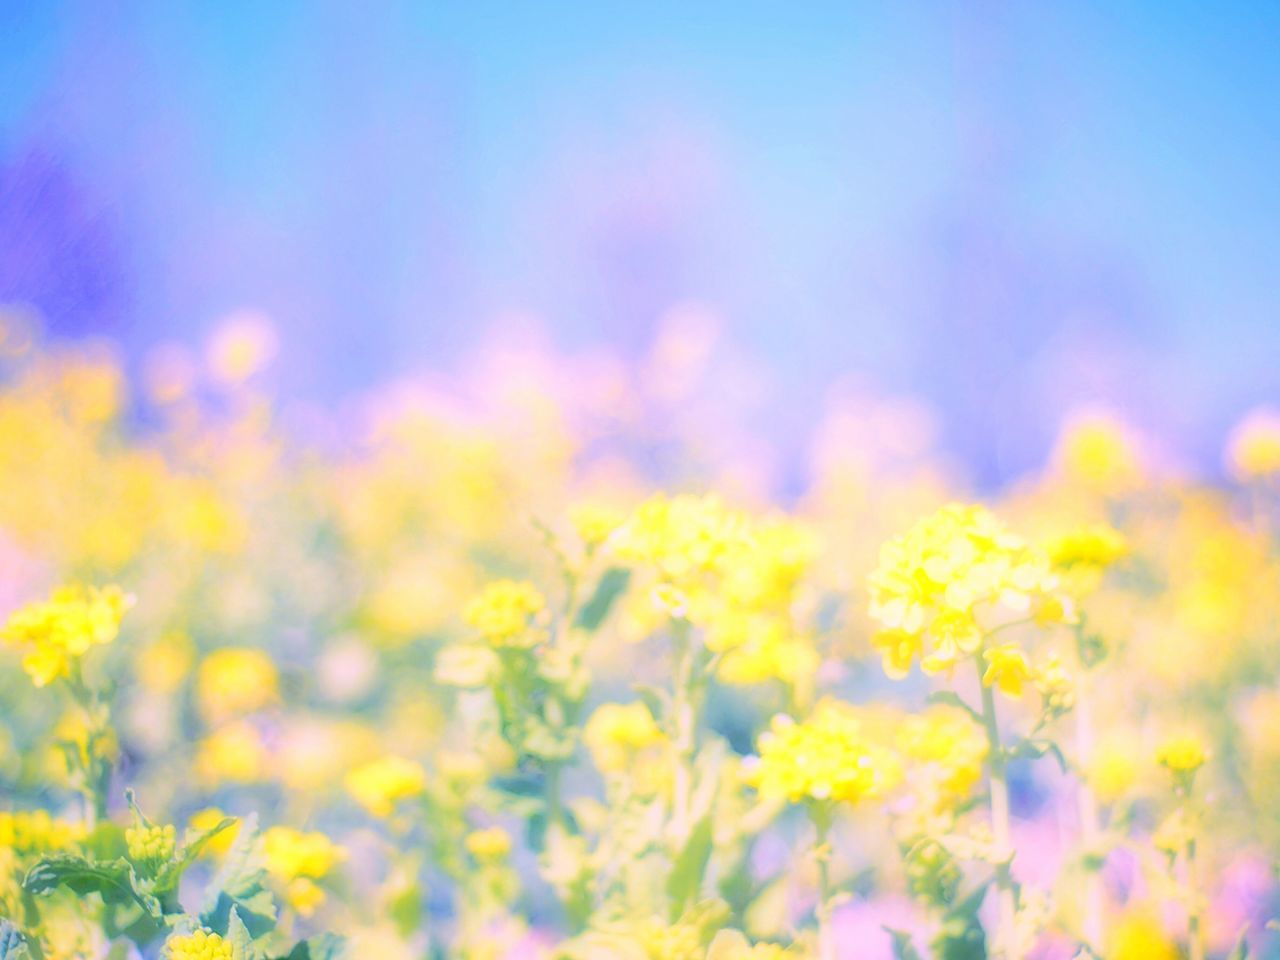 flower, yellow, freshness, growth, fragility, beauty in nature, petal, flower head, blooming, nature, focus on foreground, plant, close-up, selective focus, field, in bloom, blossom, stem, outdoors, springtime